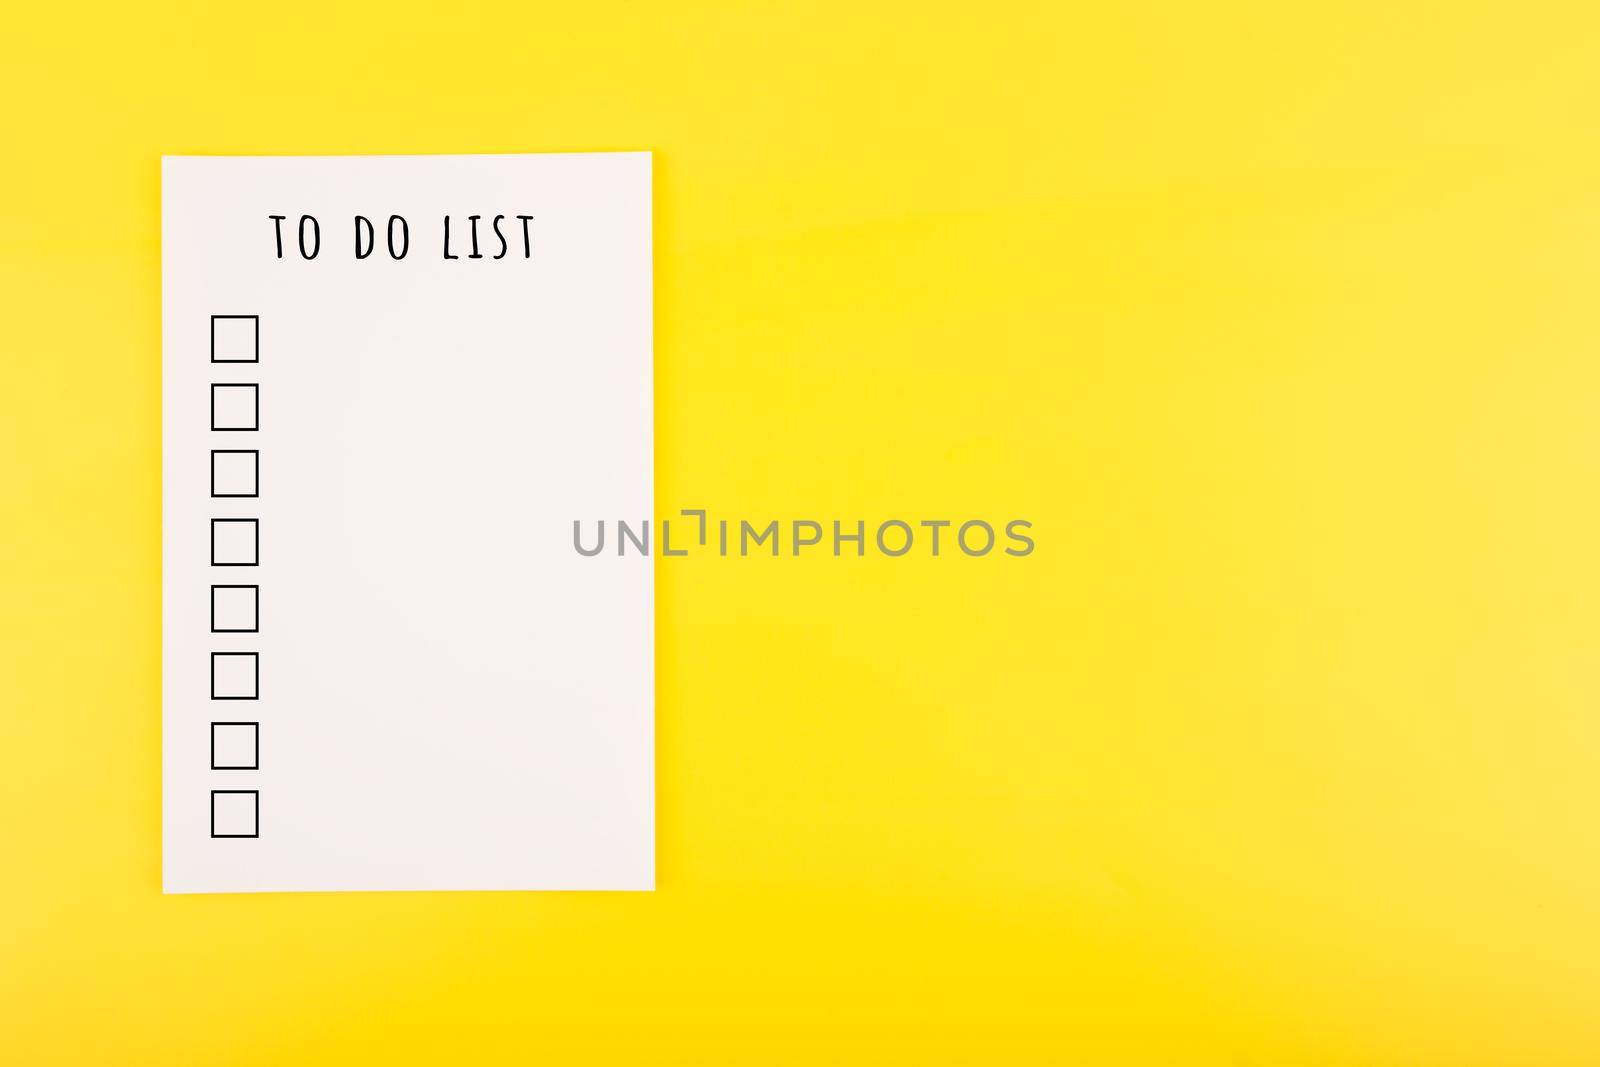 To do list concept in bright yellow color with copy space. White sheet of paper with to do list headline and checkboxes on yellow background with copy space